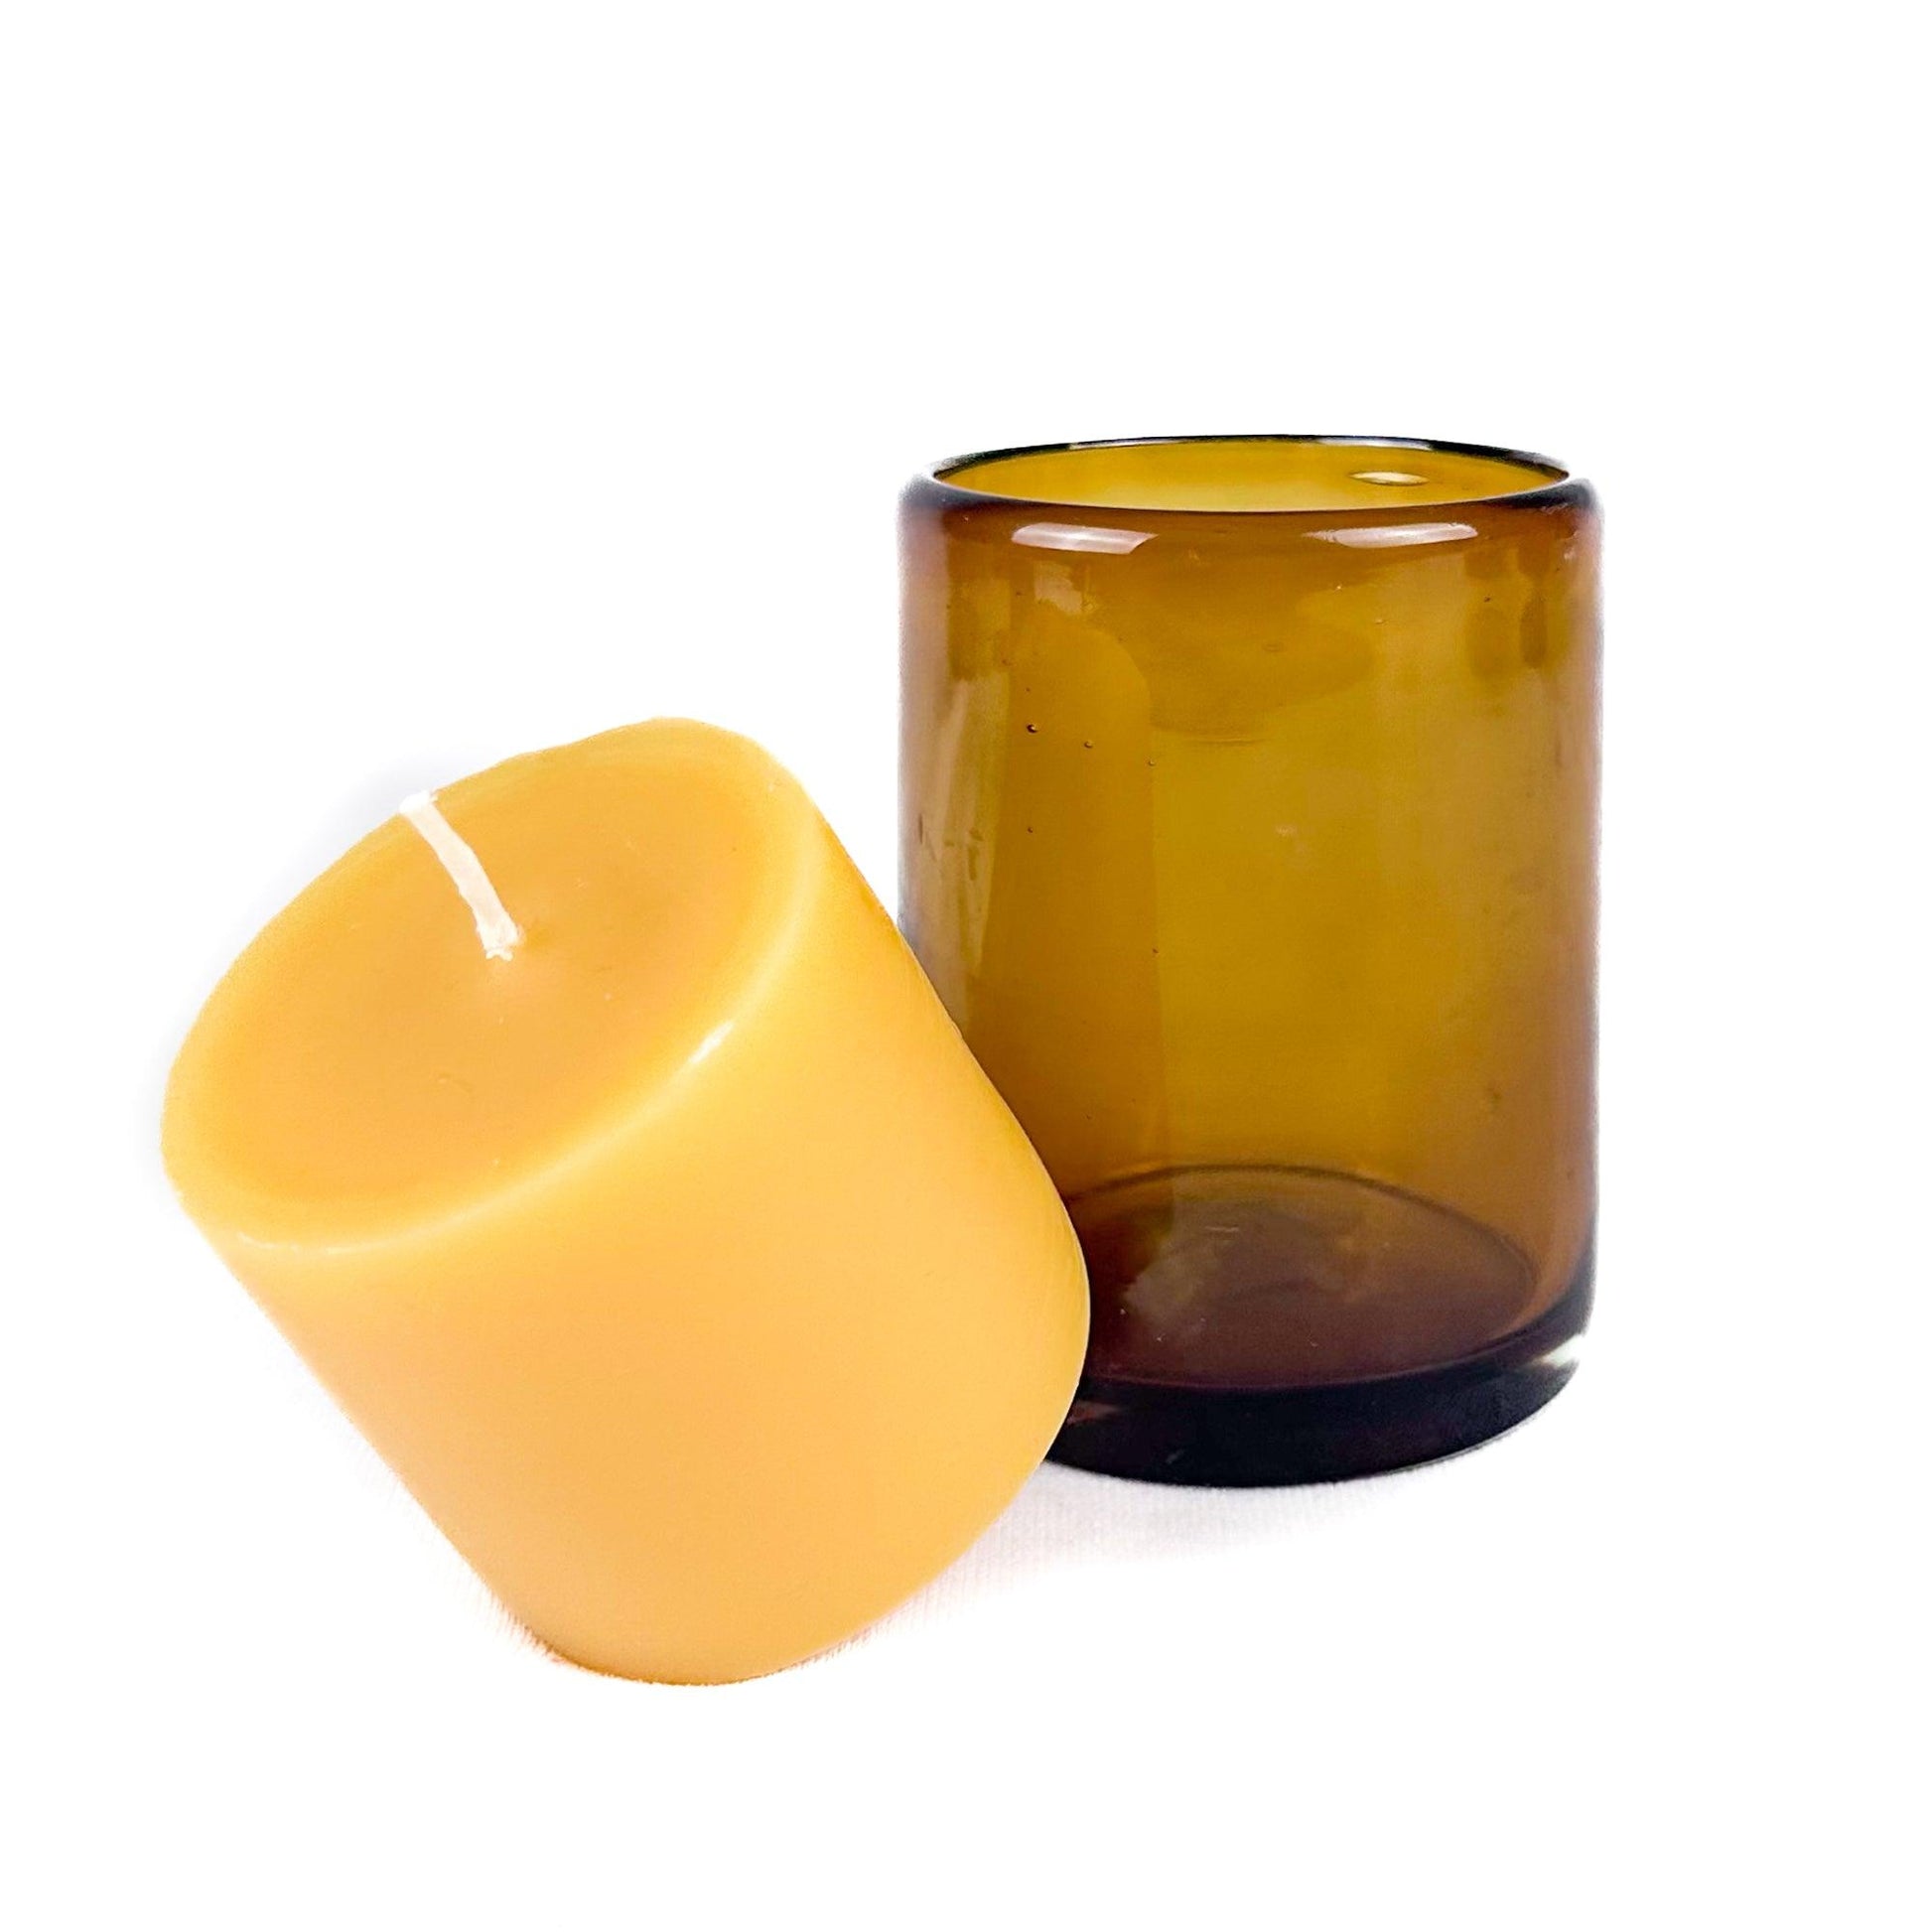 Botanica Beeswax Scented Candle - 3-Wick Cypress - Sandalwood / Refill